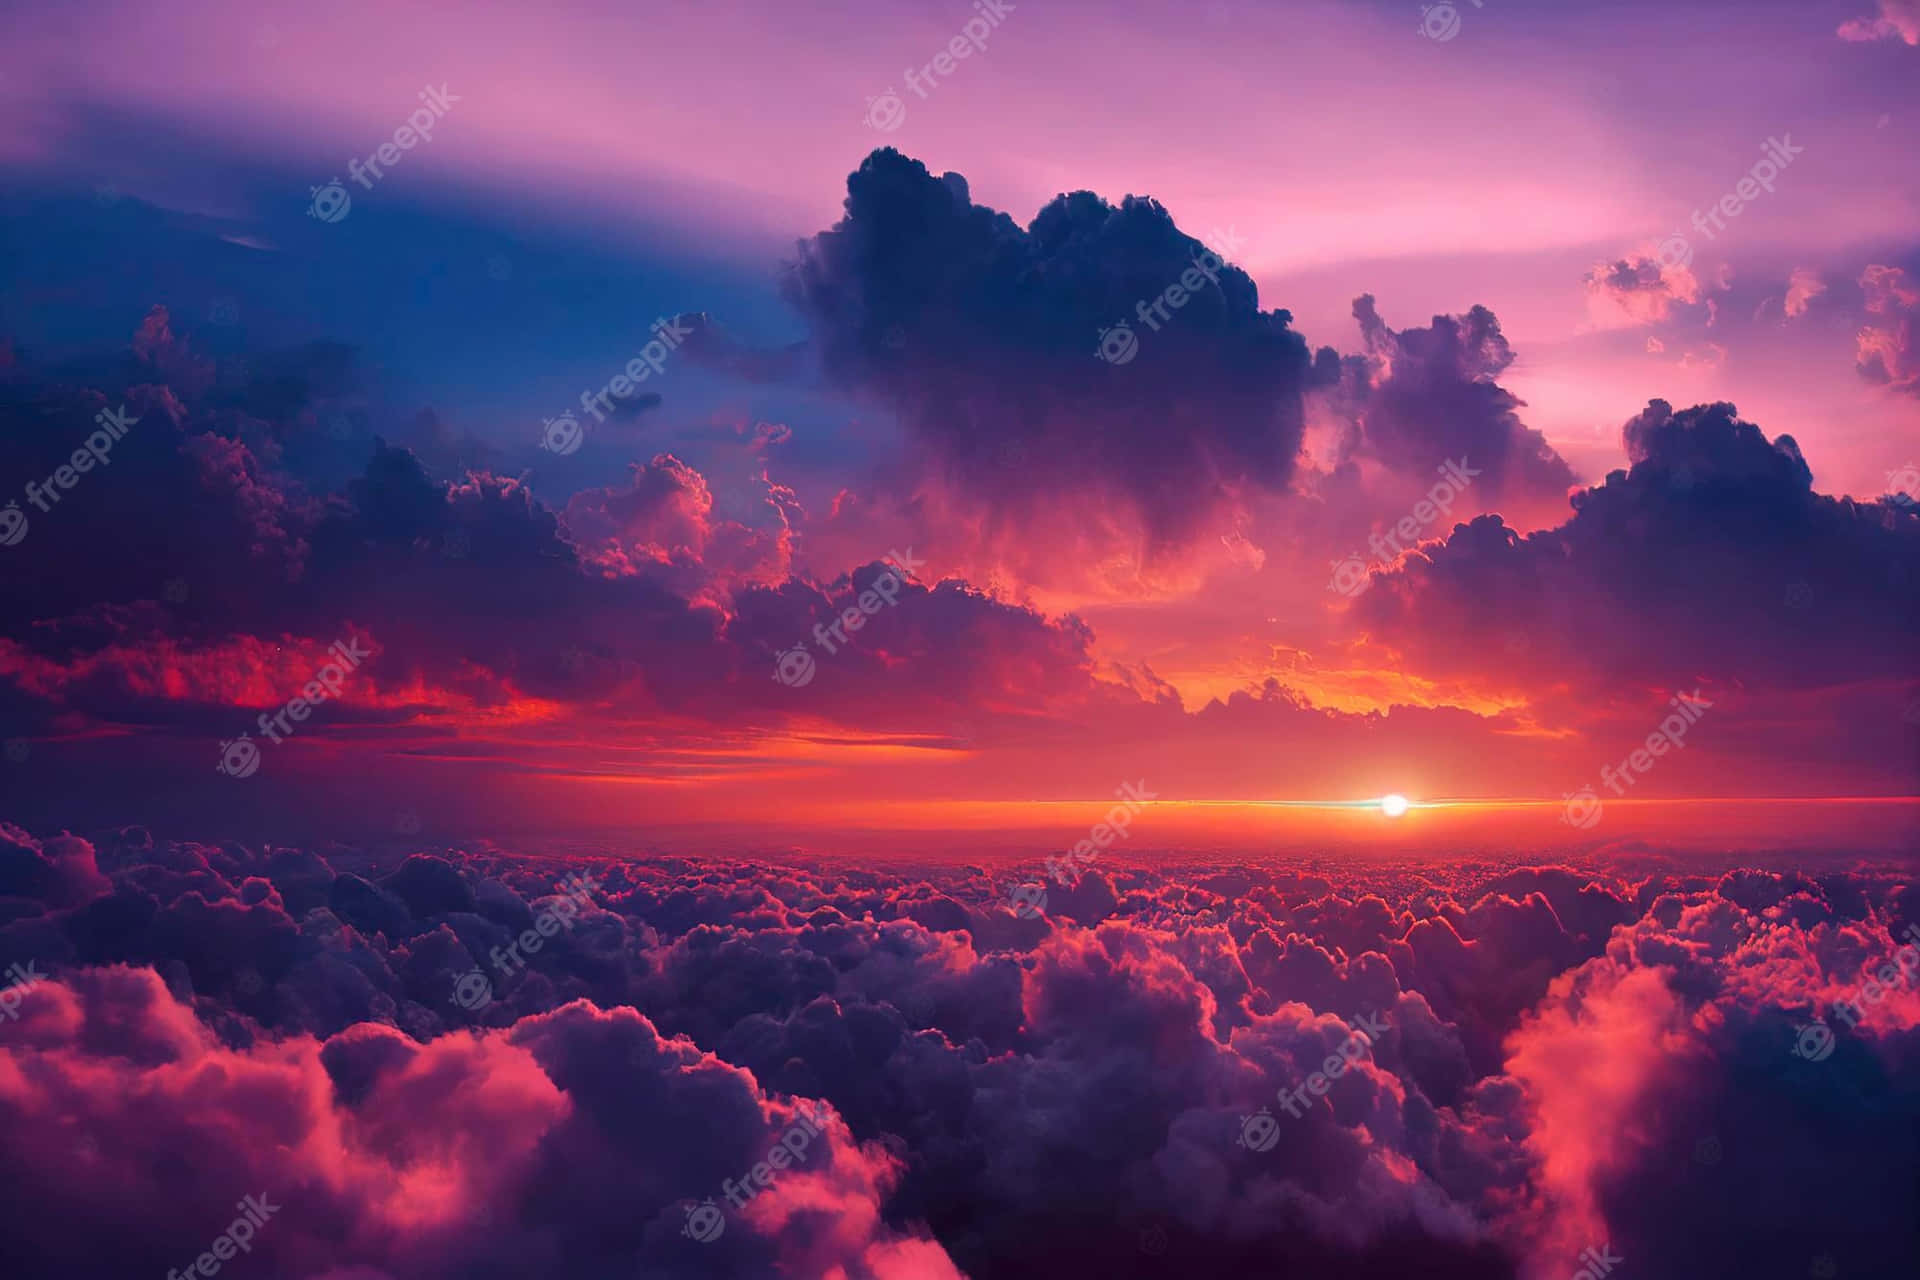 Sunset Over Clouds With Purple Sky Wallpaper